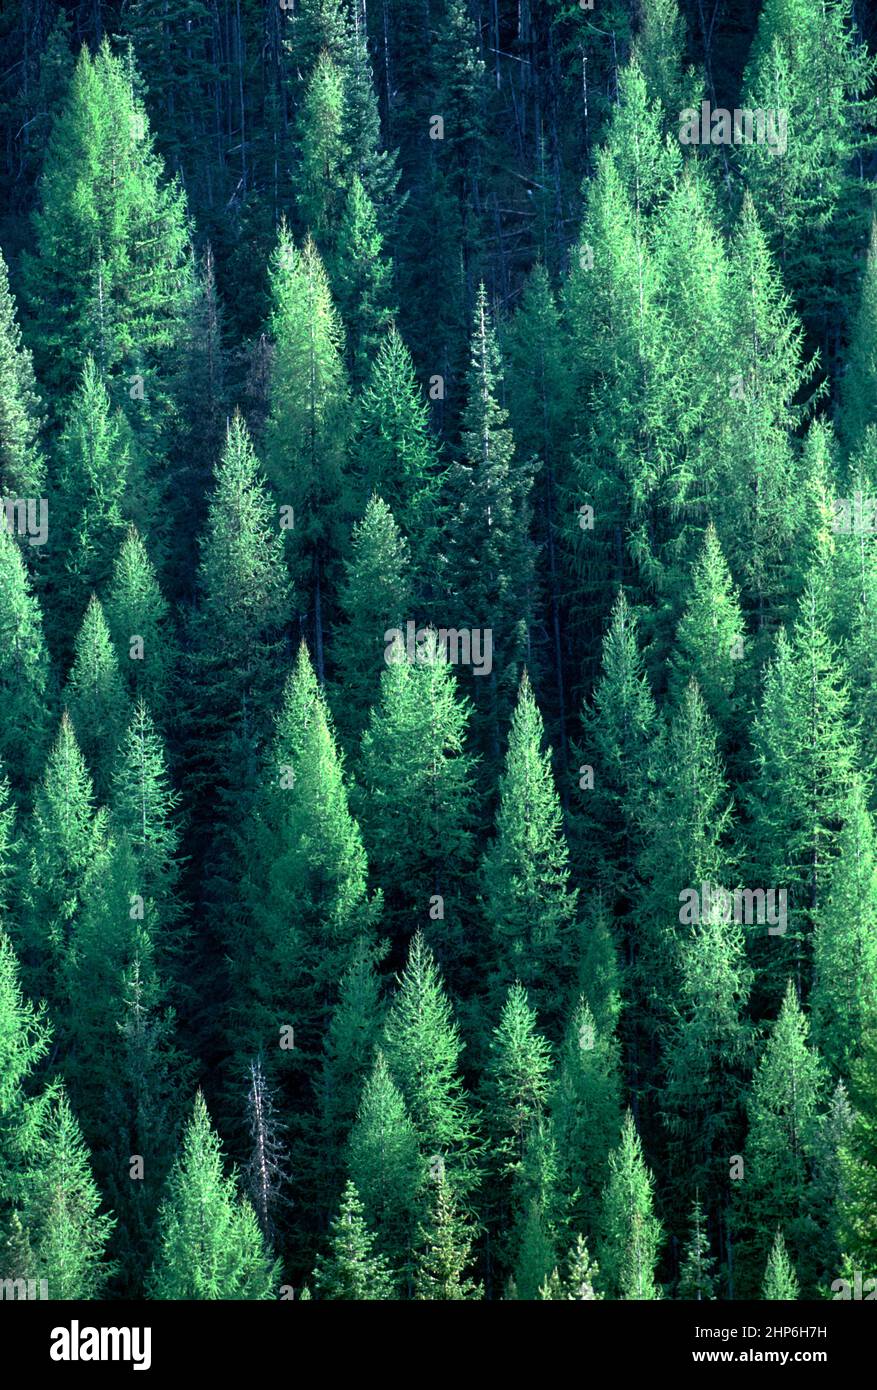 Mixed coniferous forest, Idaho Panhandle National Forest. Stock Photo